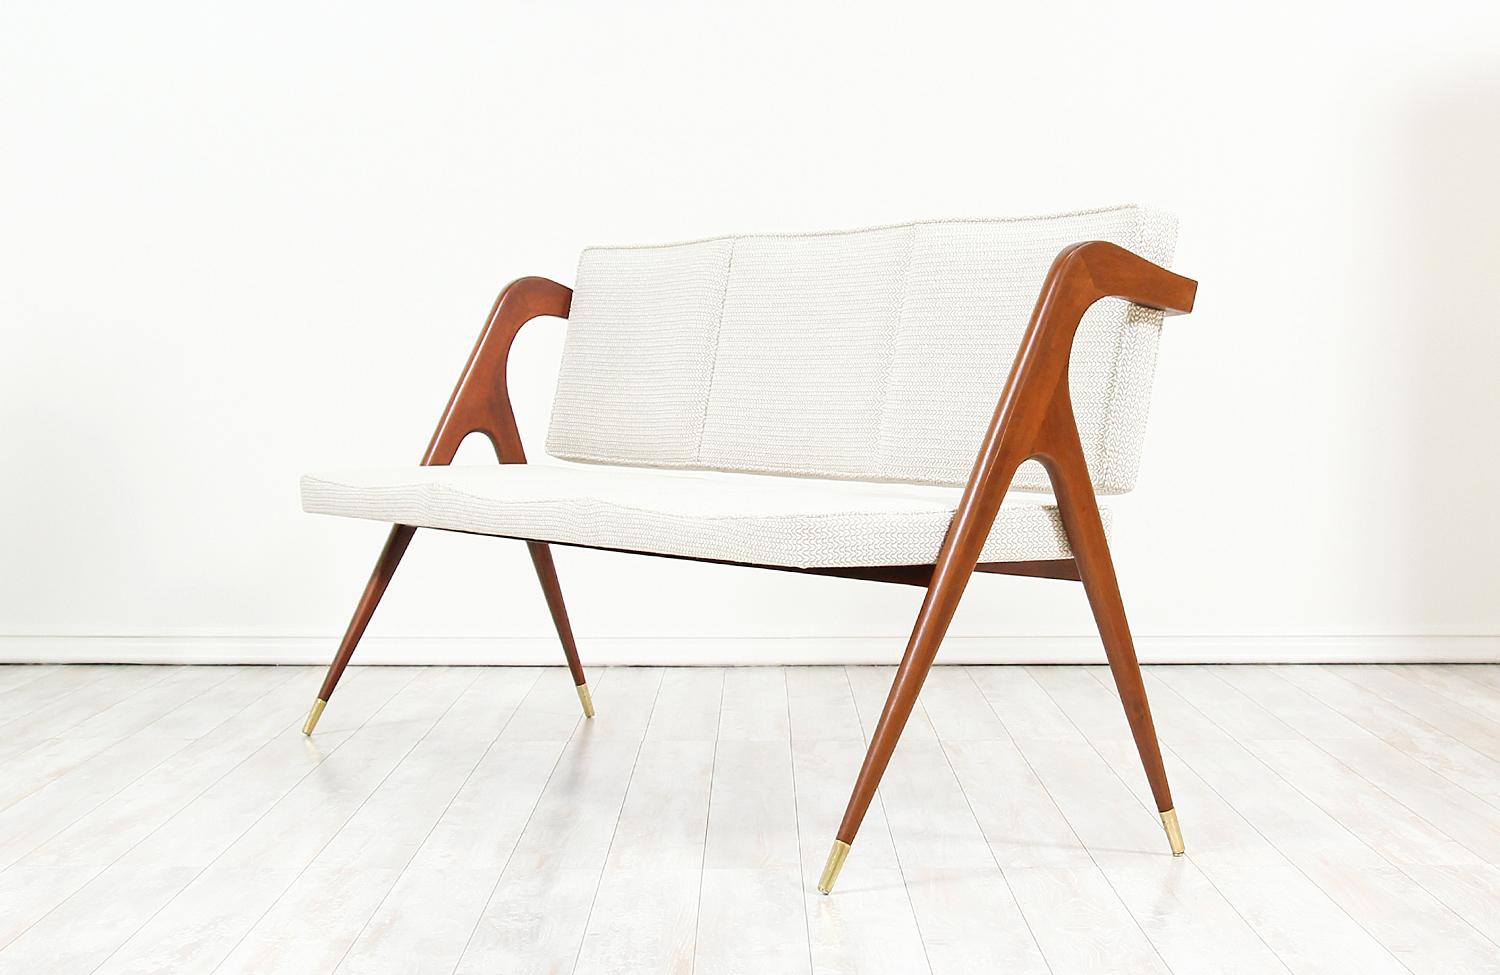 mexican modernist furniture